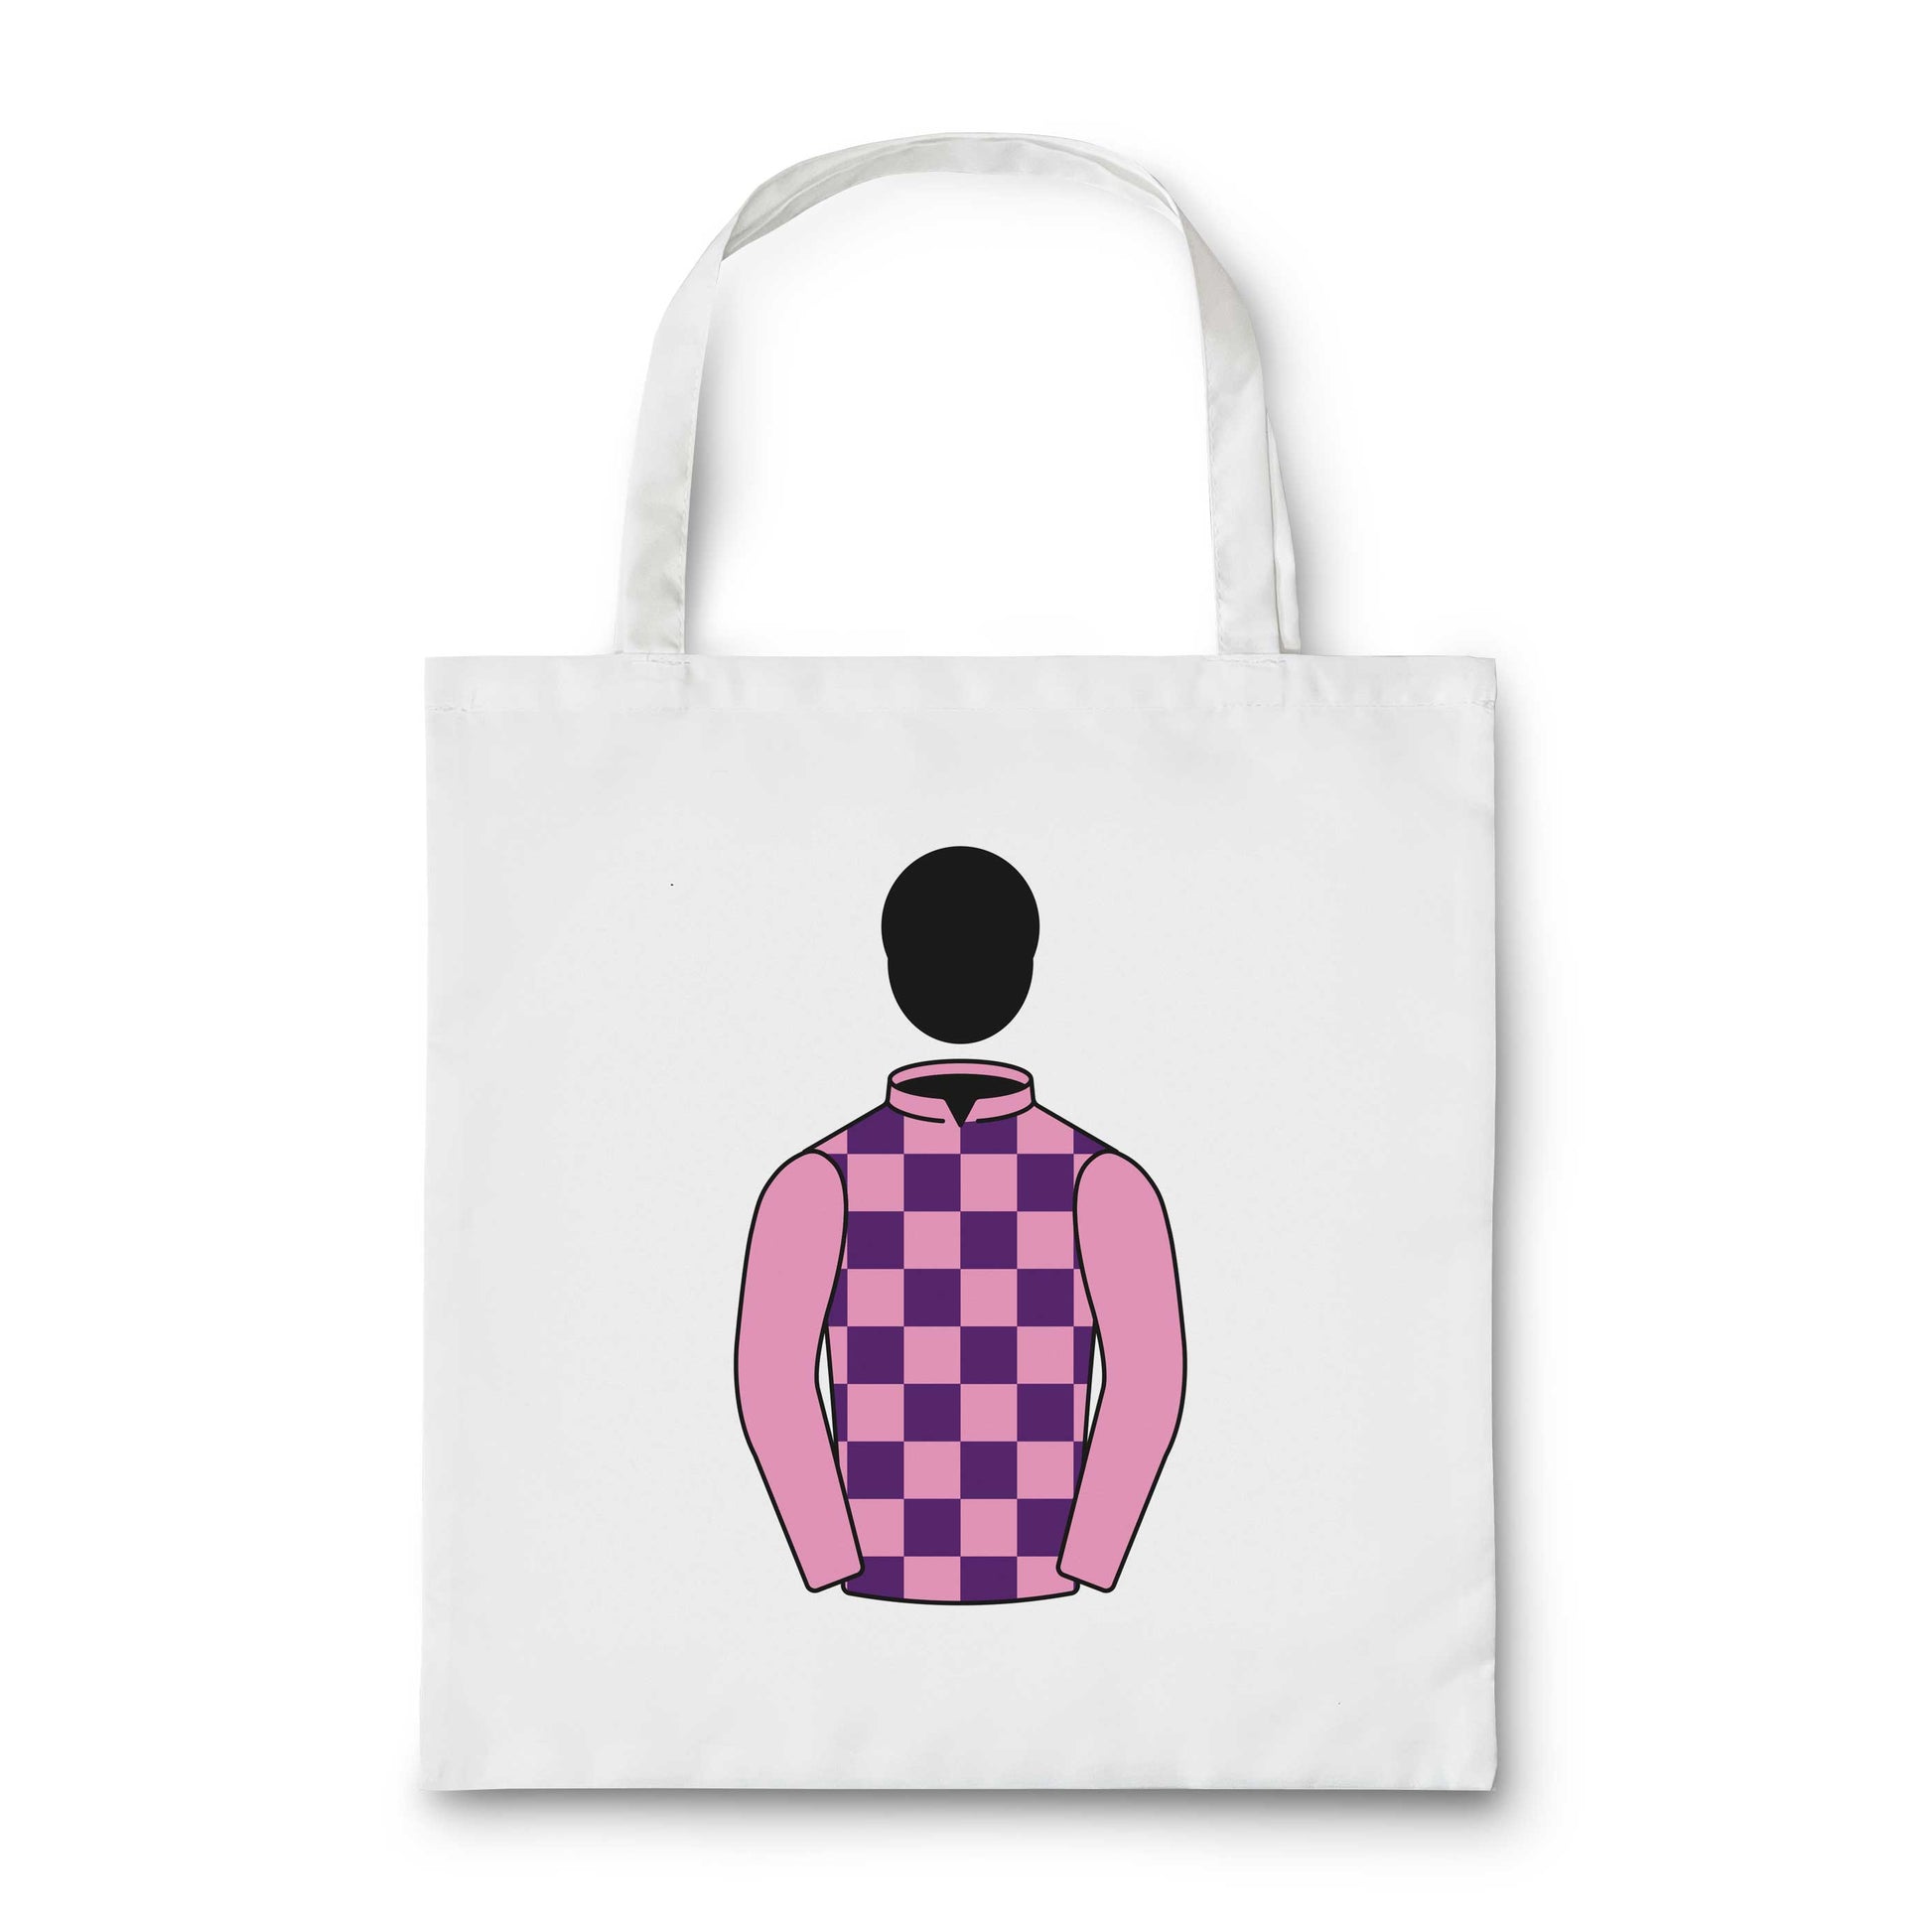 David J S Sewell And Tim Leadbeater Tote Bag - Tote Bag - Hacked Up